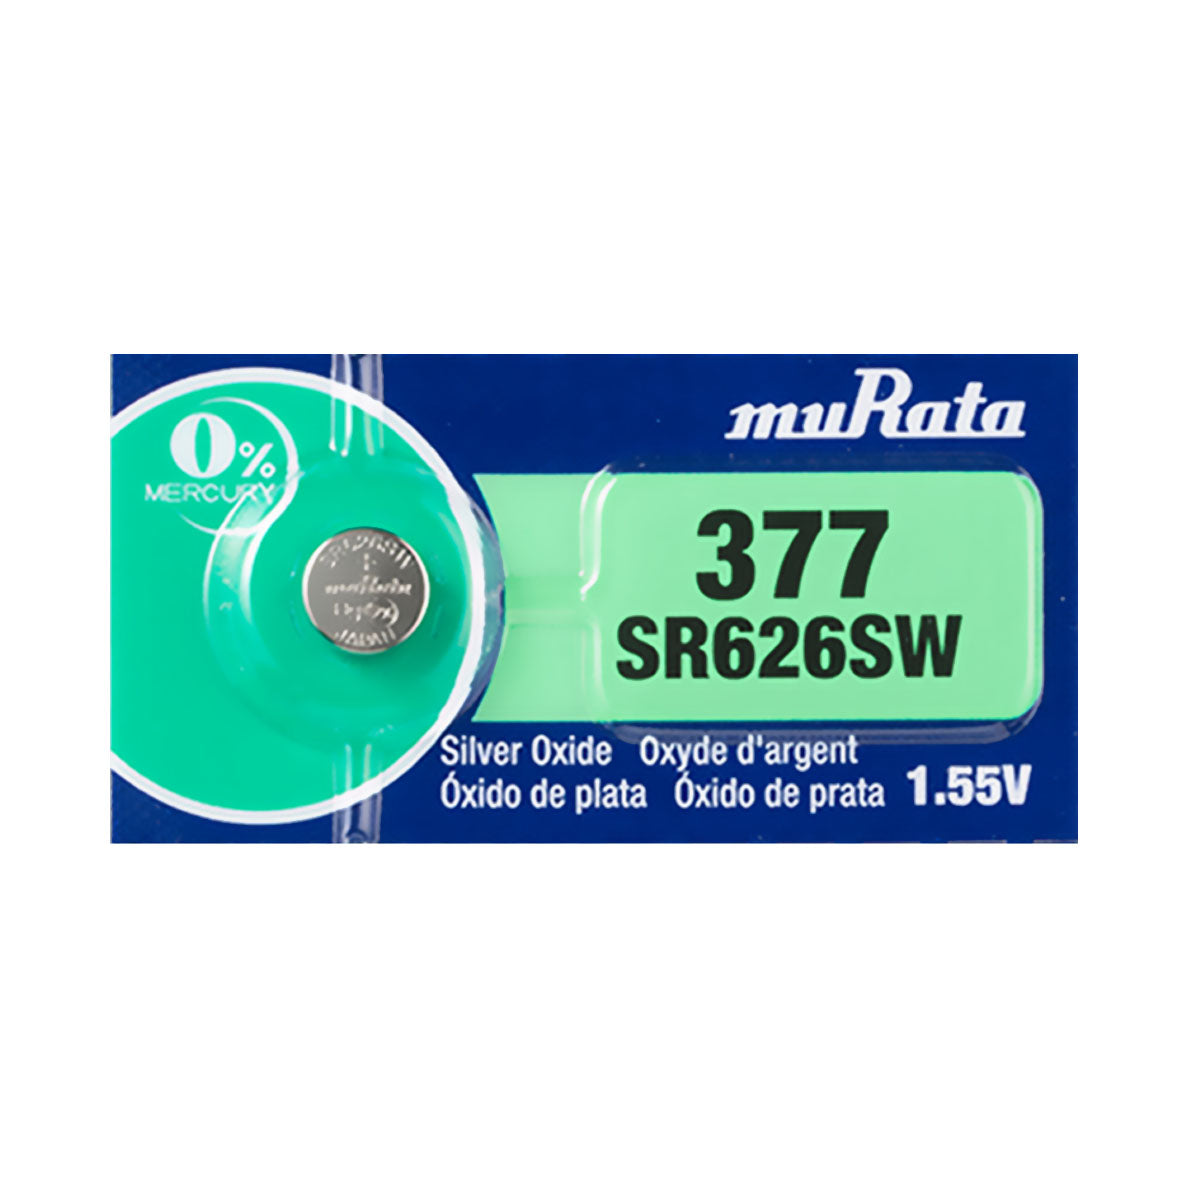 Sony / Murata 377 (SR626SW) 1.55V Silver Oxide Battery (1 Pack) – ICELLYOU